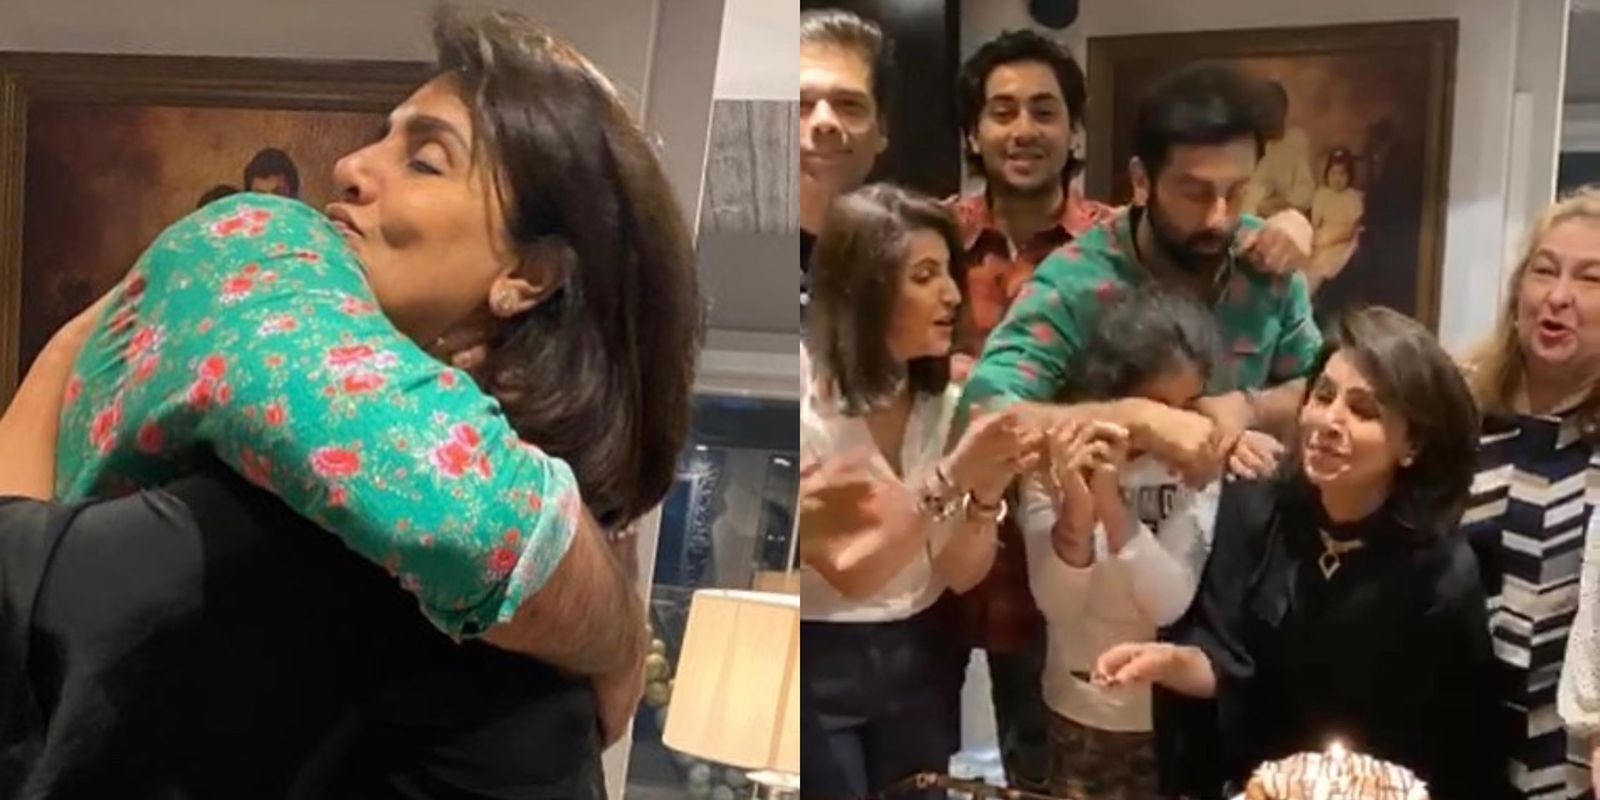 Neetu Kapoor Feels She The 'Richest' Celebrating Her Birthday With Her Loved Ones Including Karan Johar And Ranbir Kapoor